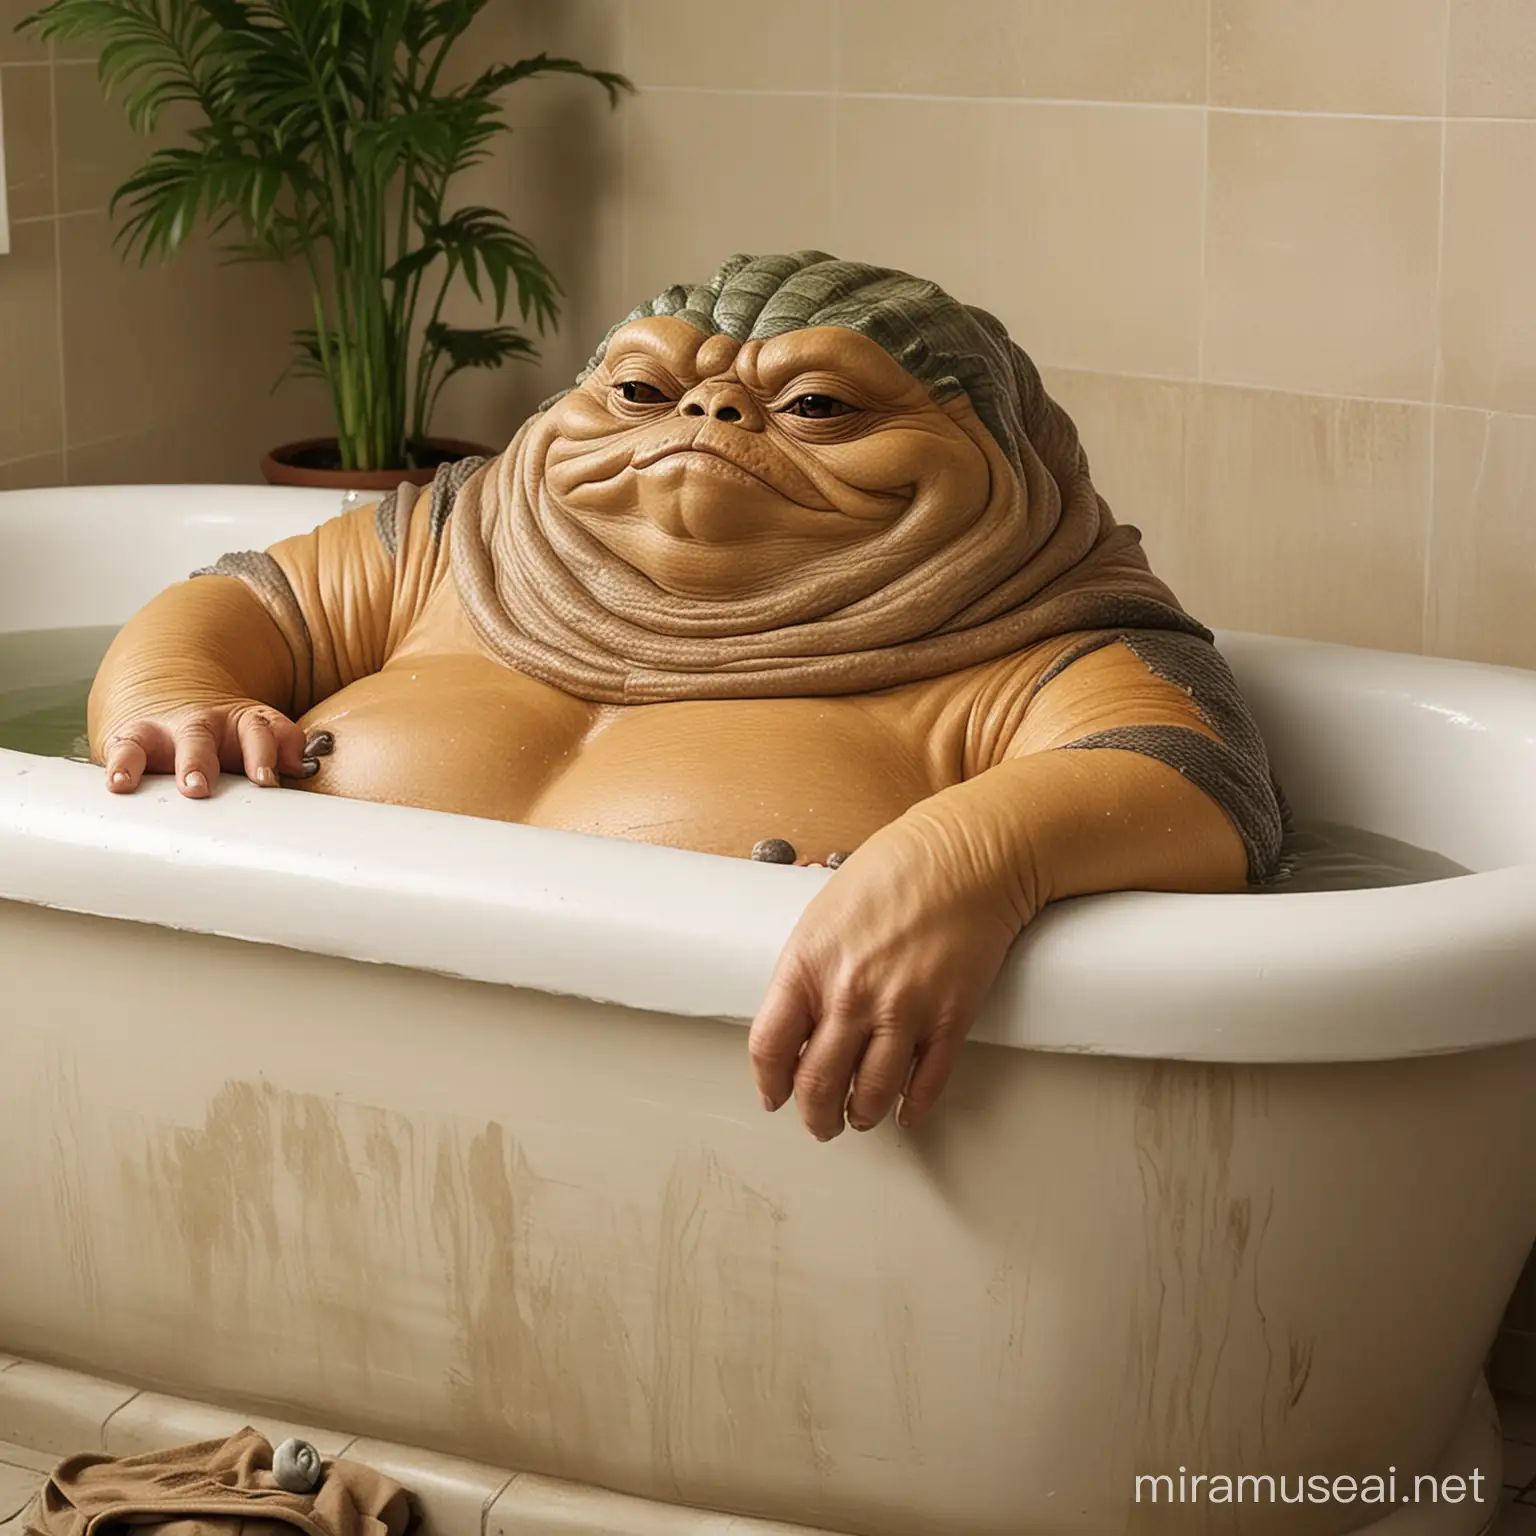 Jabba the Hutt Finds Relief Battling Back Pain in the Bathtub